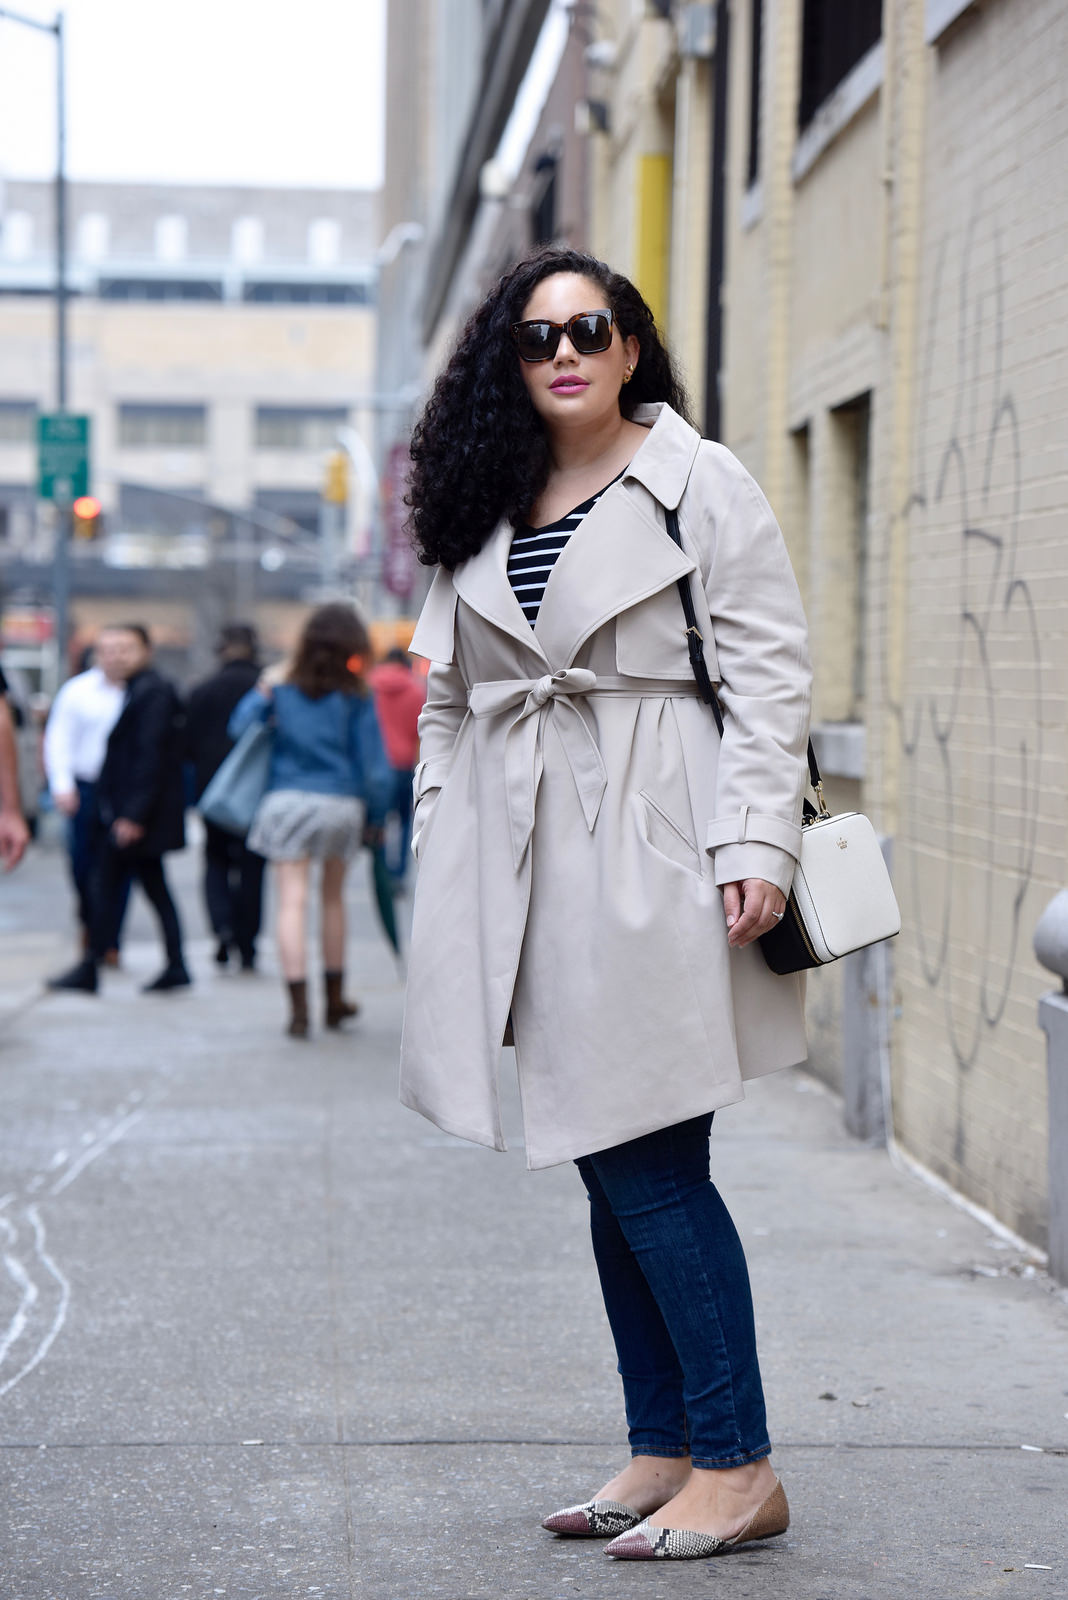 Girl with Curves wearing a trench coat from Asos, Kate Spade Casie bag, Rockstar jeans from Old navy and flats from J Crew.